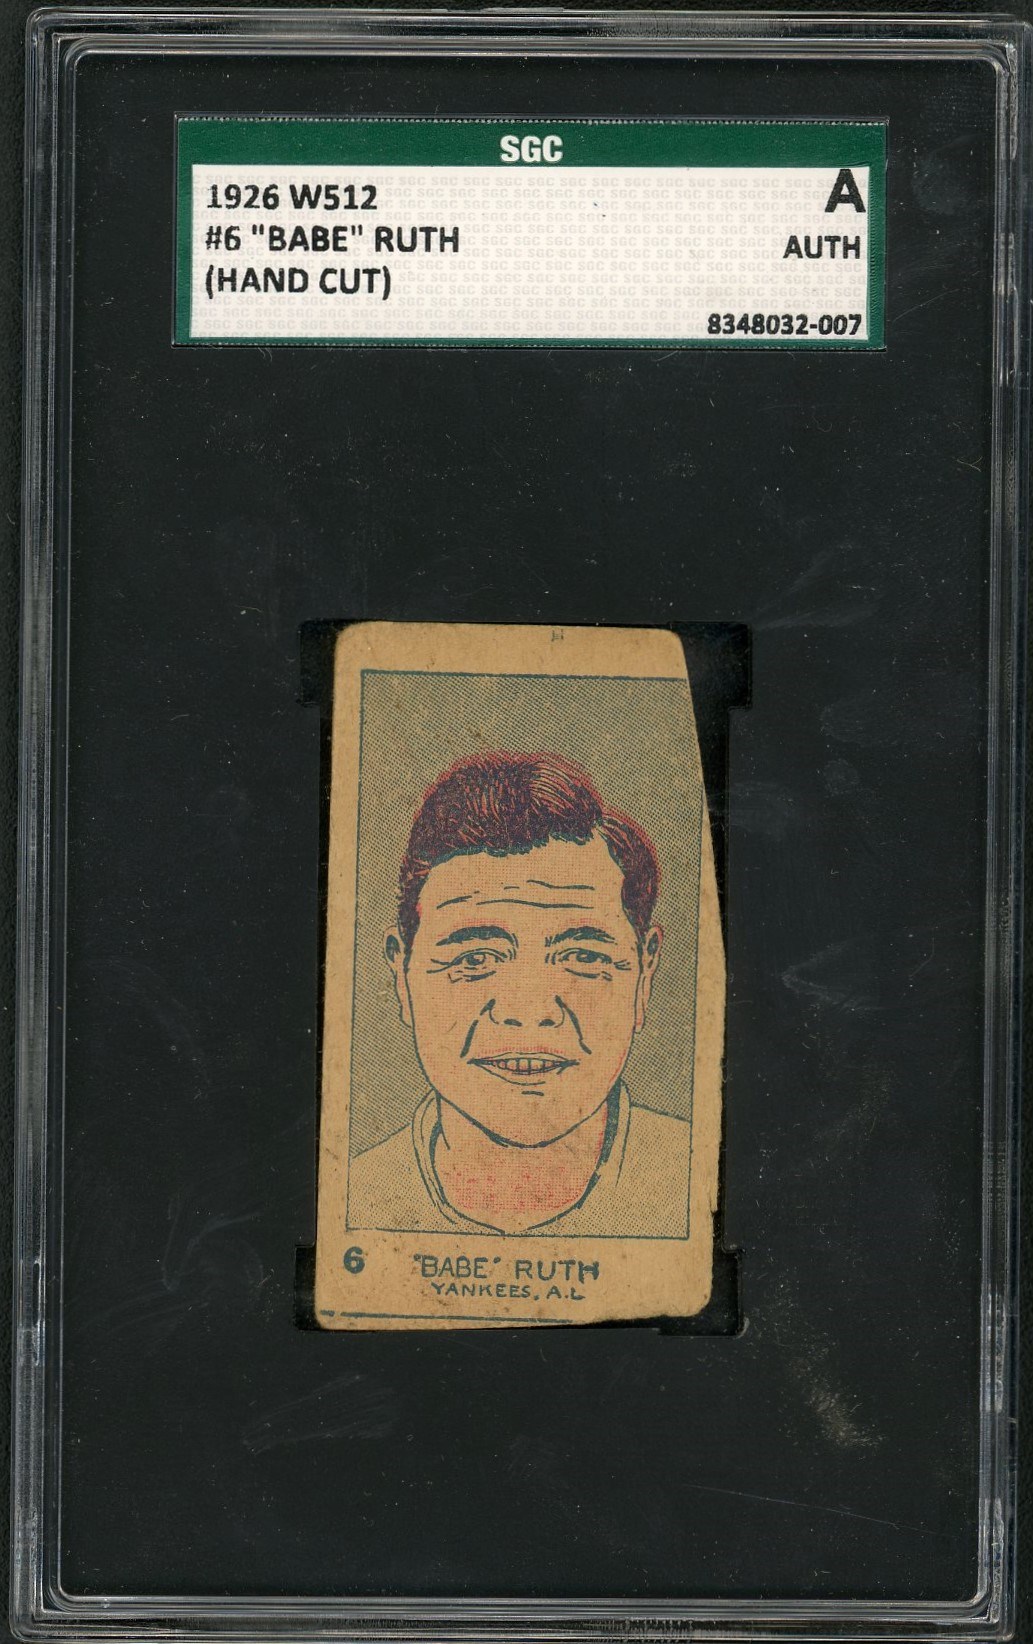 Baseball and Trading Cards - 1926 W512 Babe Ruth (Hand Cut) - SGC AUTHENTIC